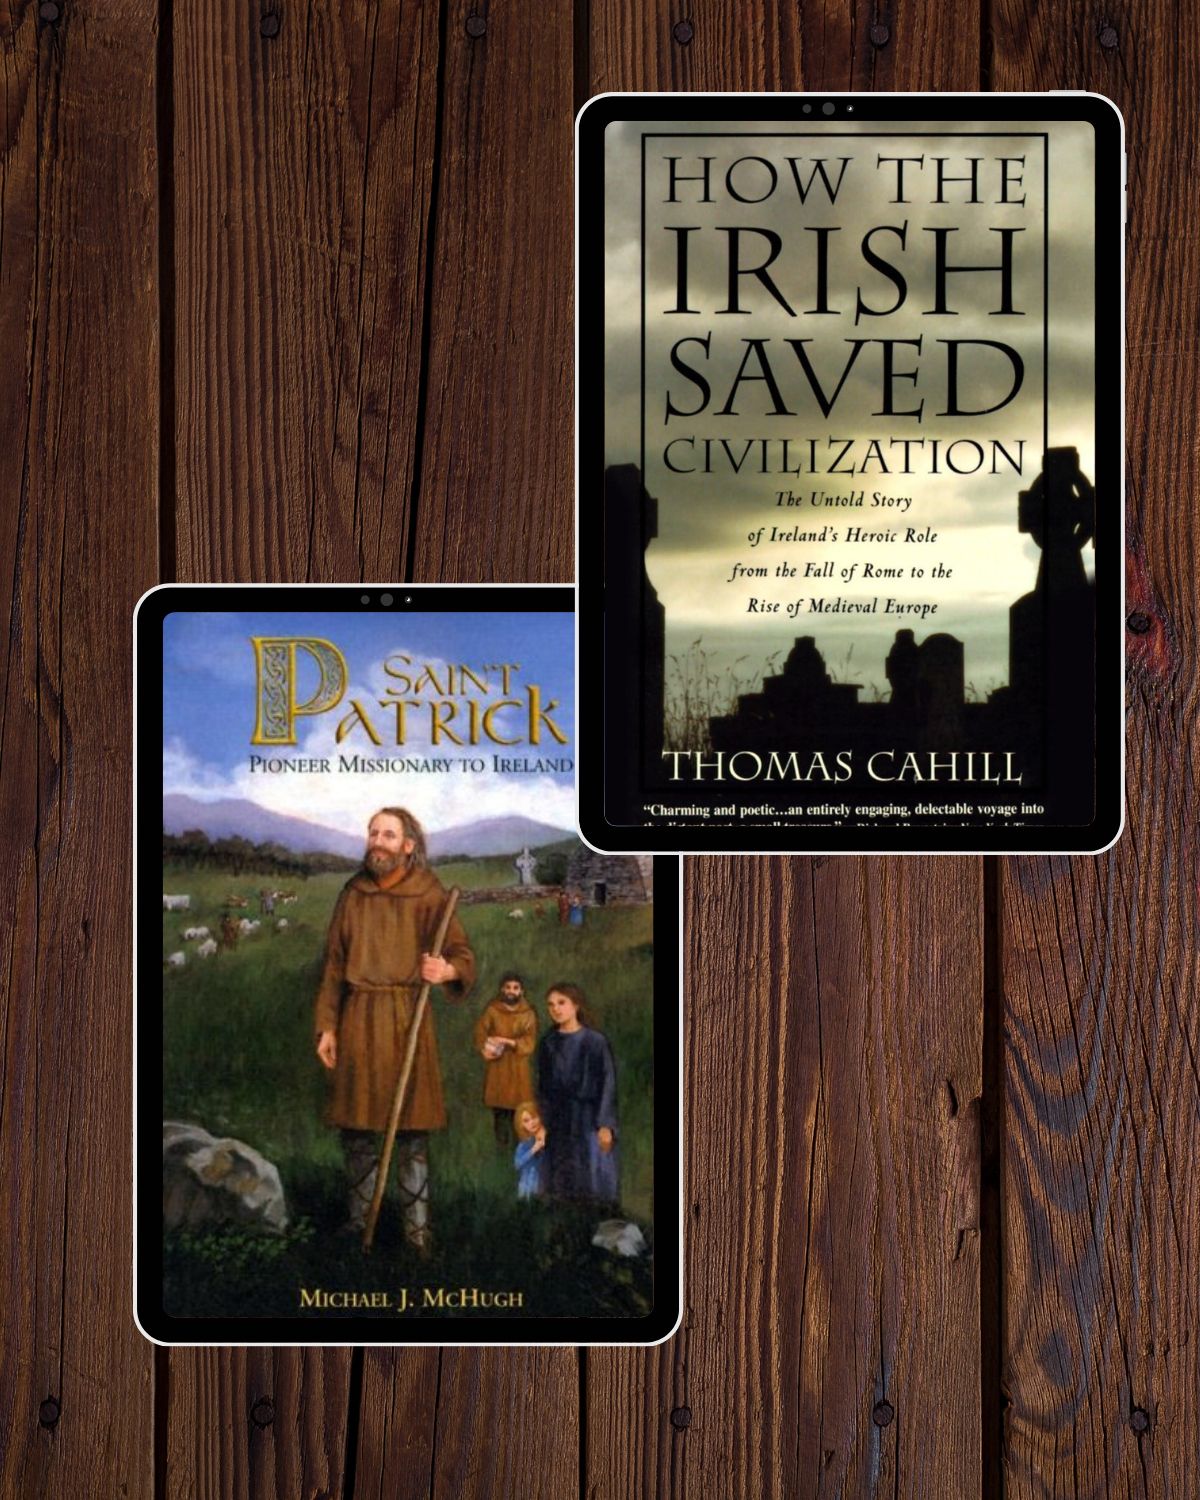 two iPads with ireland book covers showing on the front.